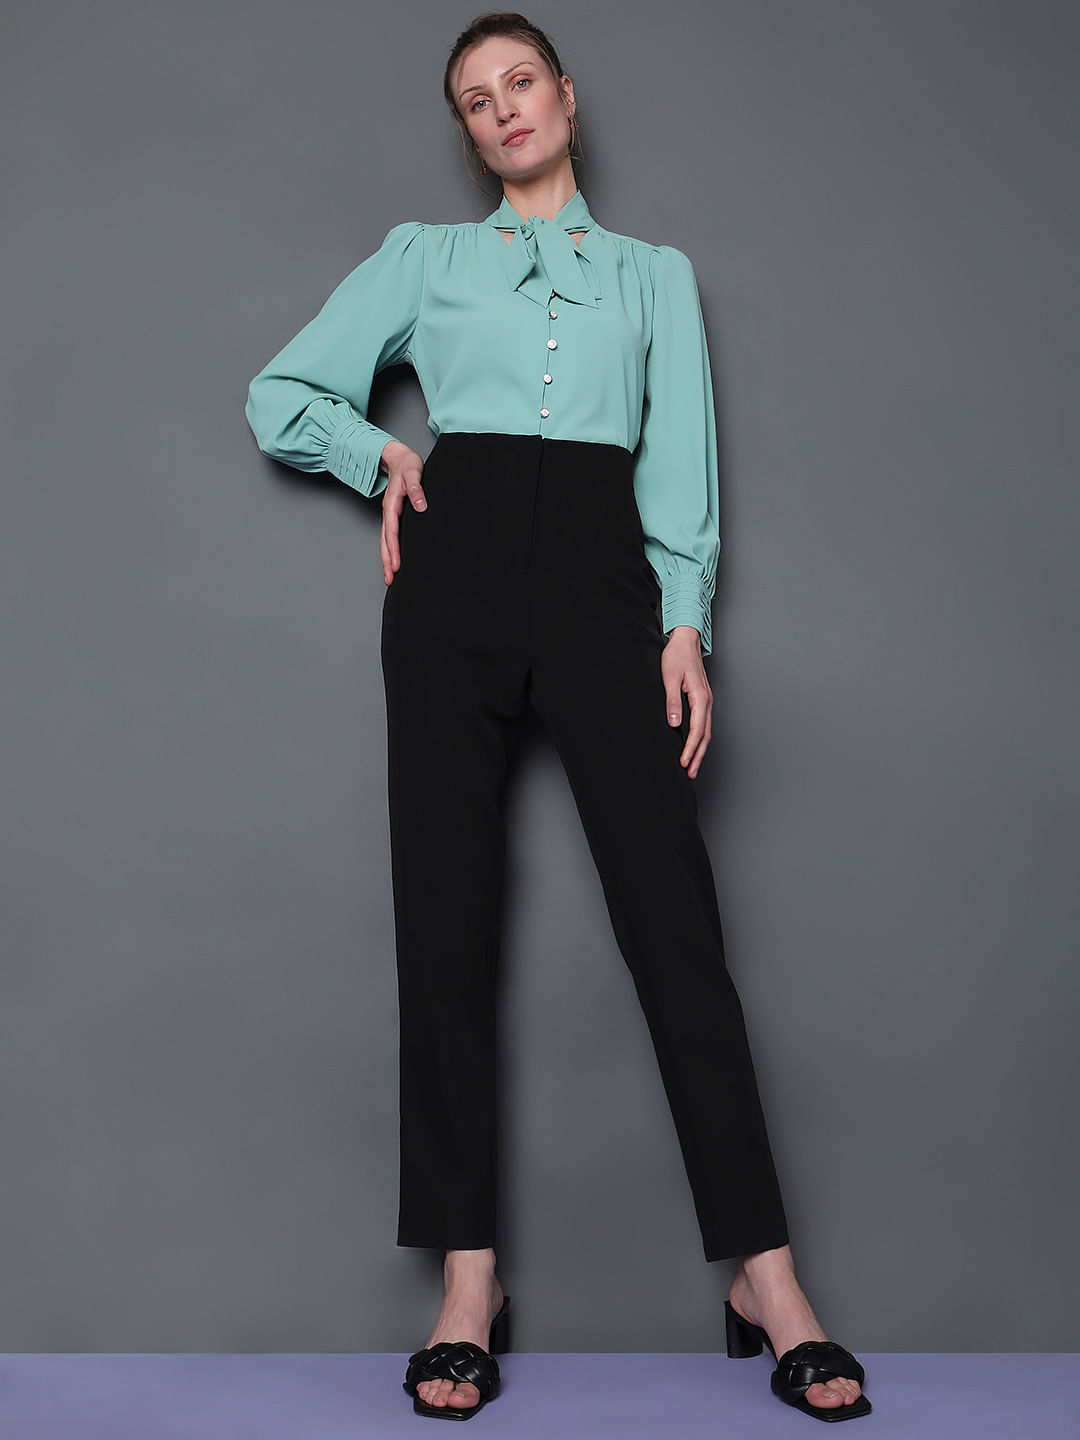 Xpose Trousers and Pants  Buy Xpose Women Dusty Pink Comfort Straight Slim  Fit High Rise Trousers Online  Nykaa Fashion